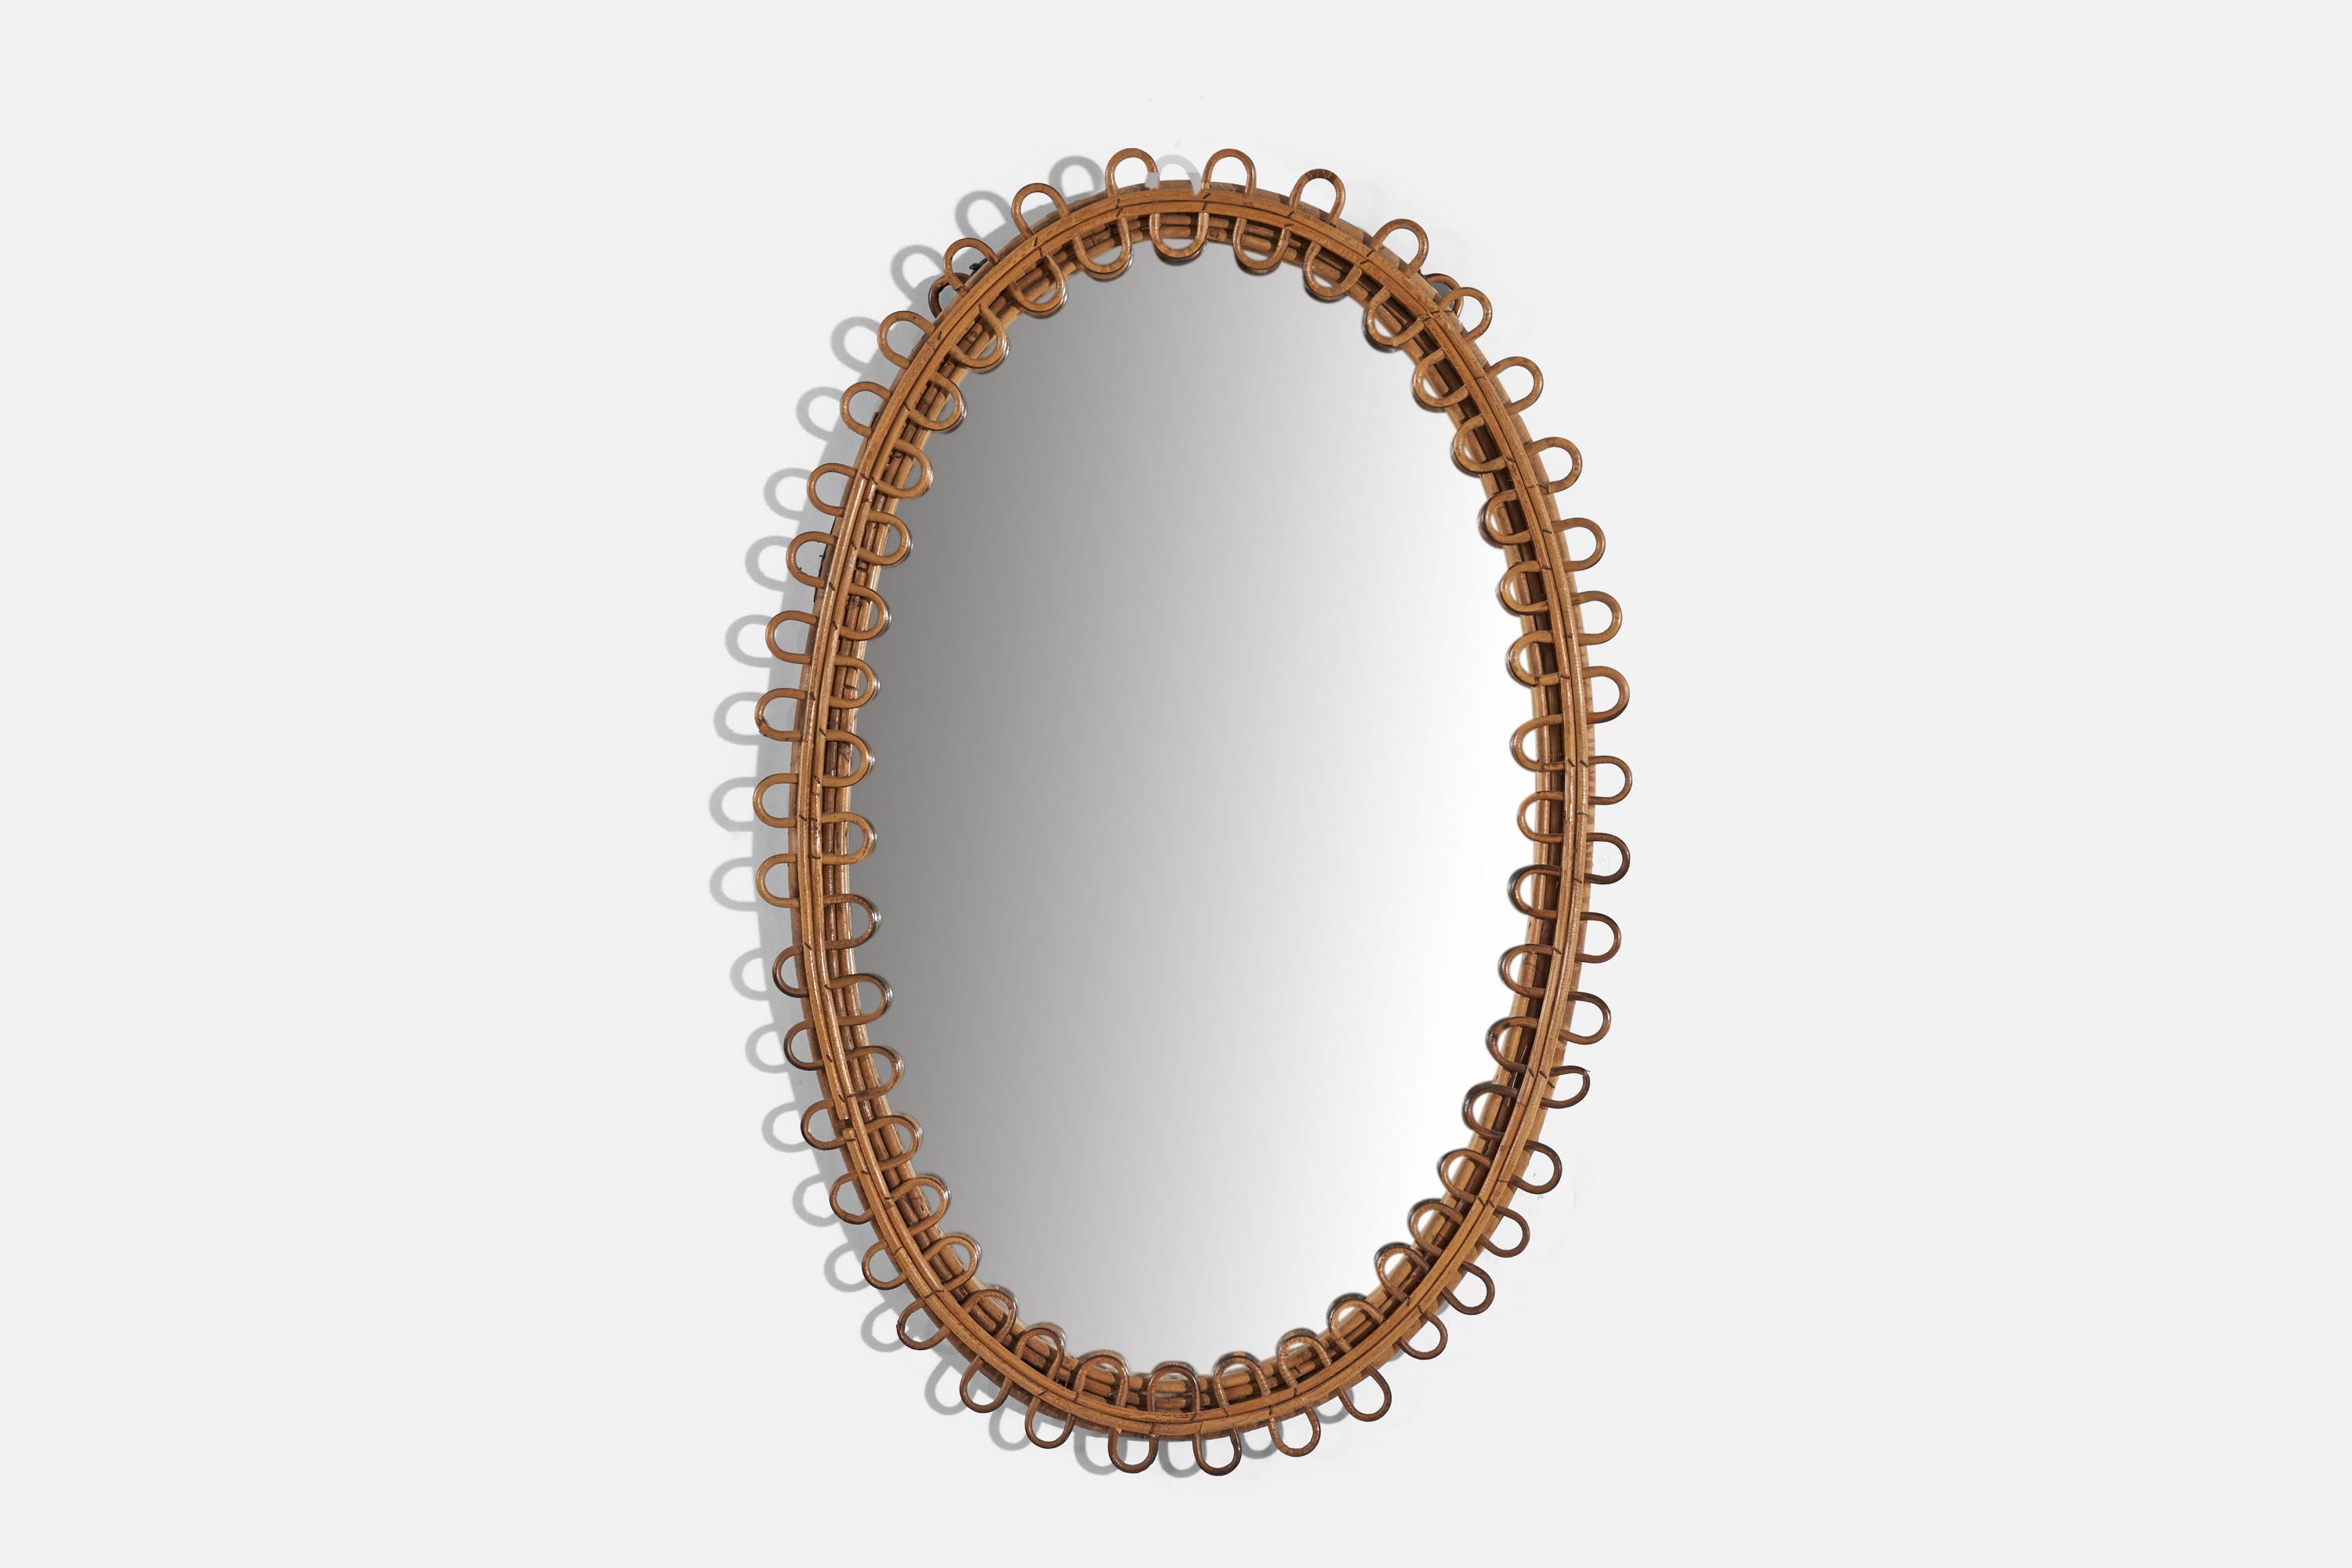 An oval rattan wall mirror designed and produced by an Italian designer, Italy, 1950s-1960s.
  